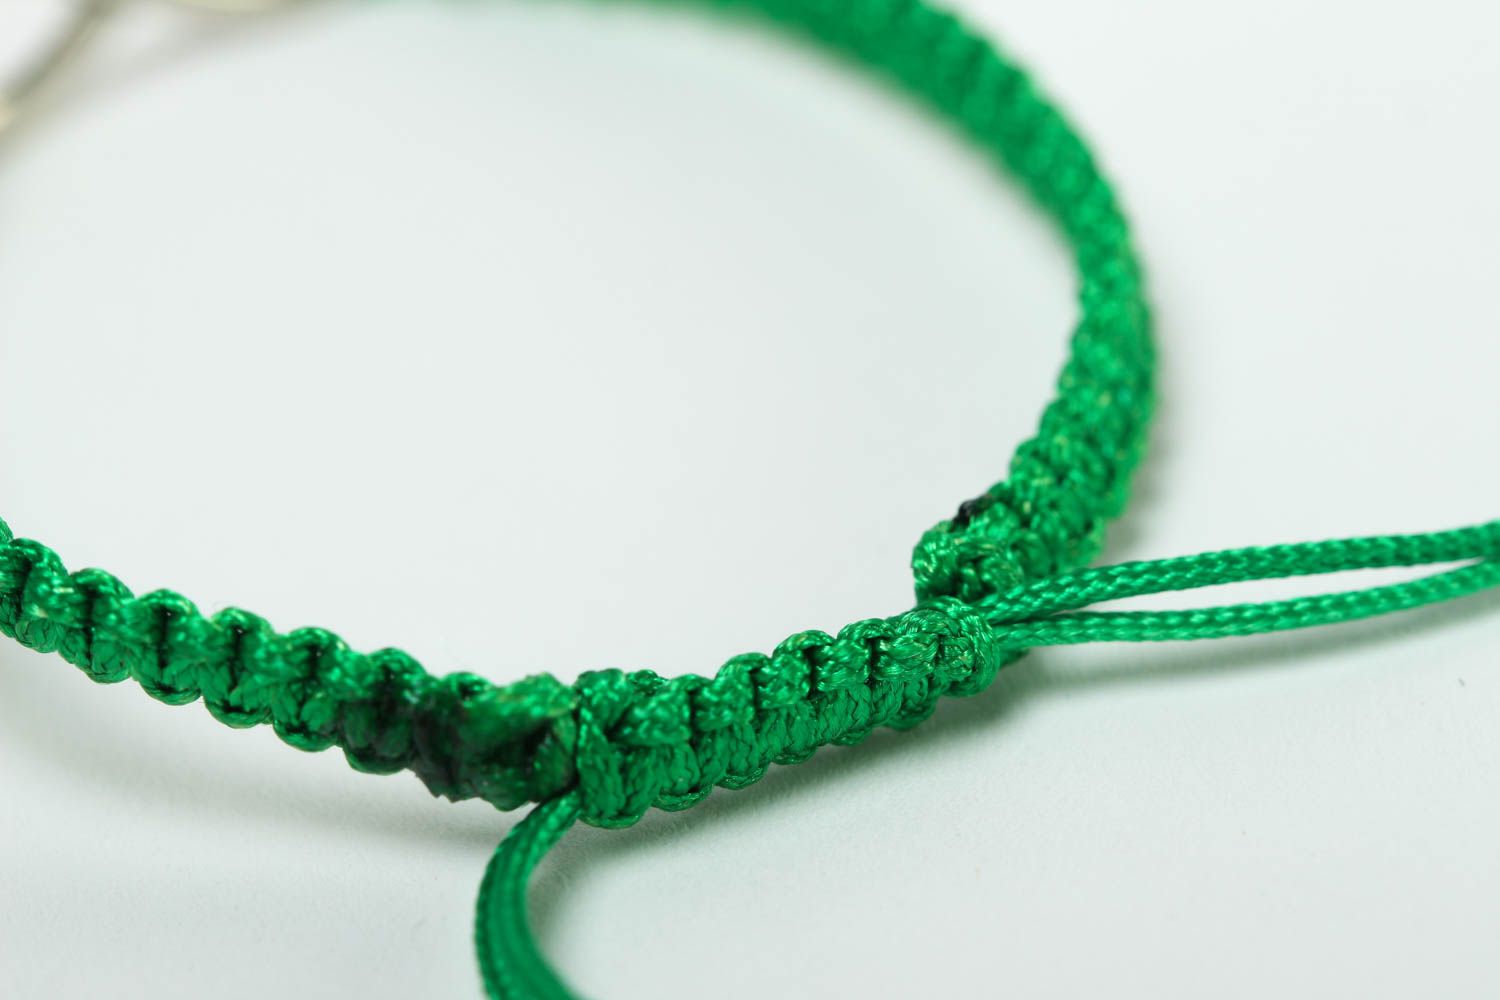 Amazon.com: Colorful Spring String Bracelet for Women - Easter Basket Gift  Handmade Knotted Macrame Pull Cord Friendship Bracelet by Rumi Sumaq :  Handmade Products